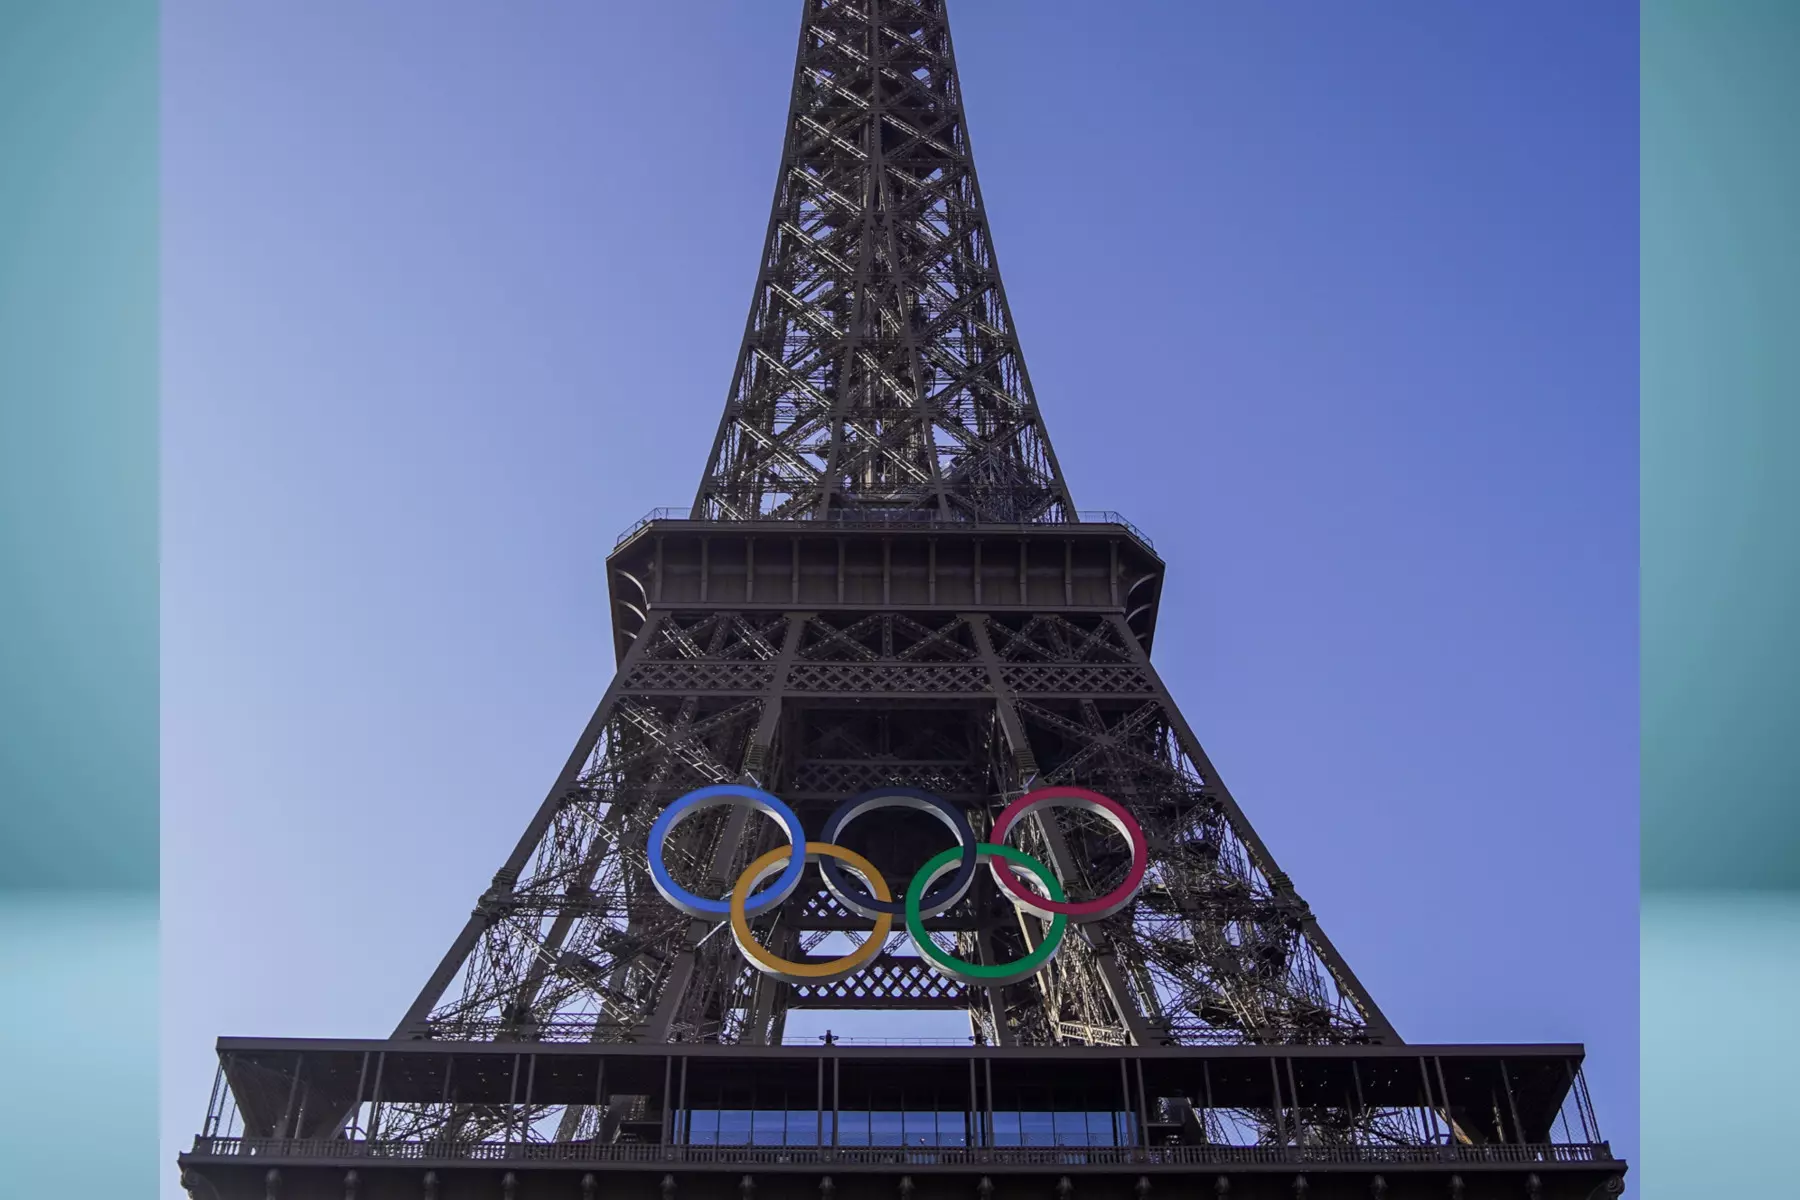 The five Olympic rings displayed on the Eiffel Tower in Paris